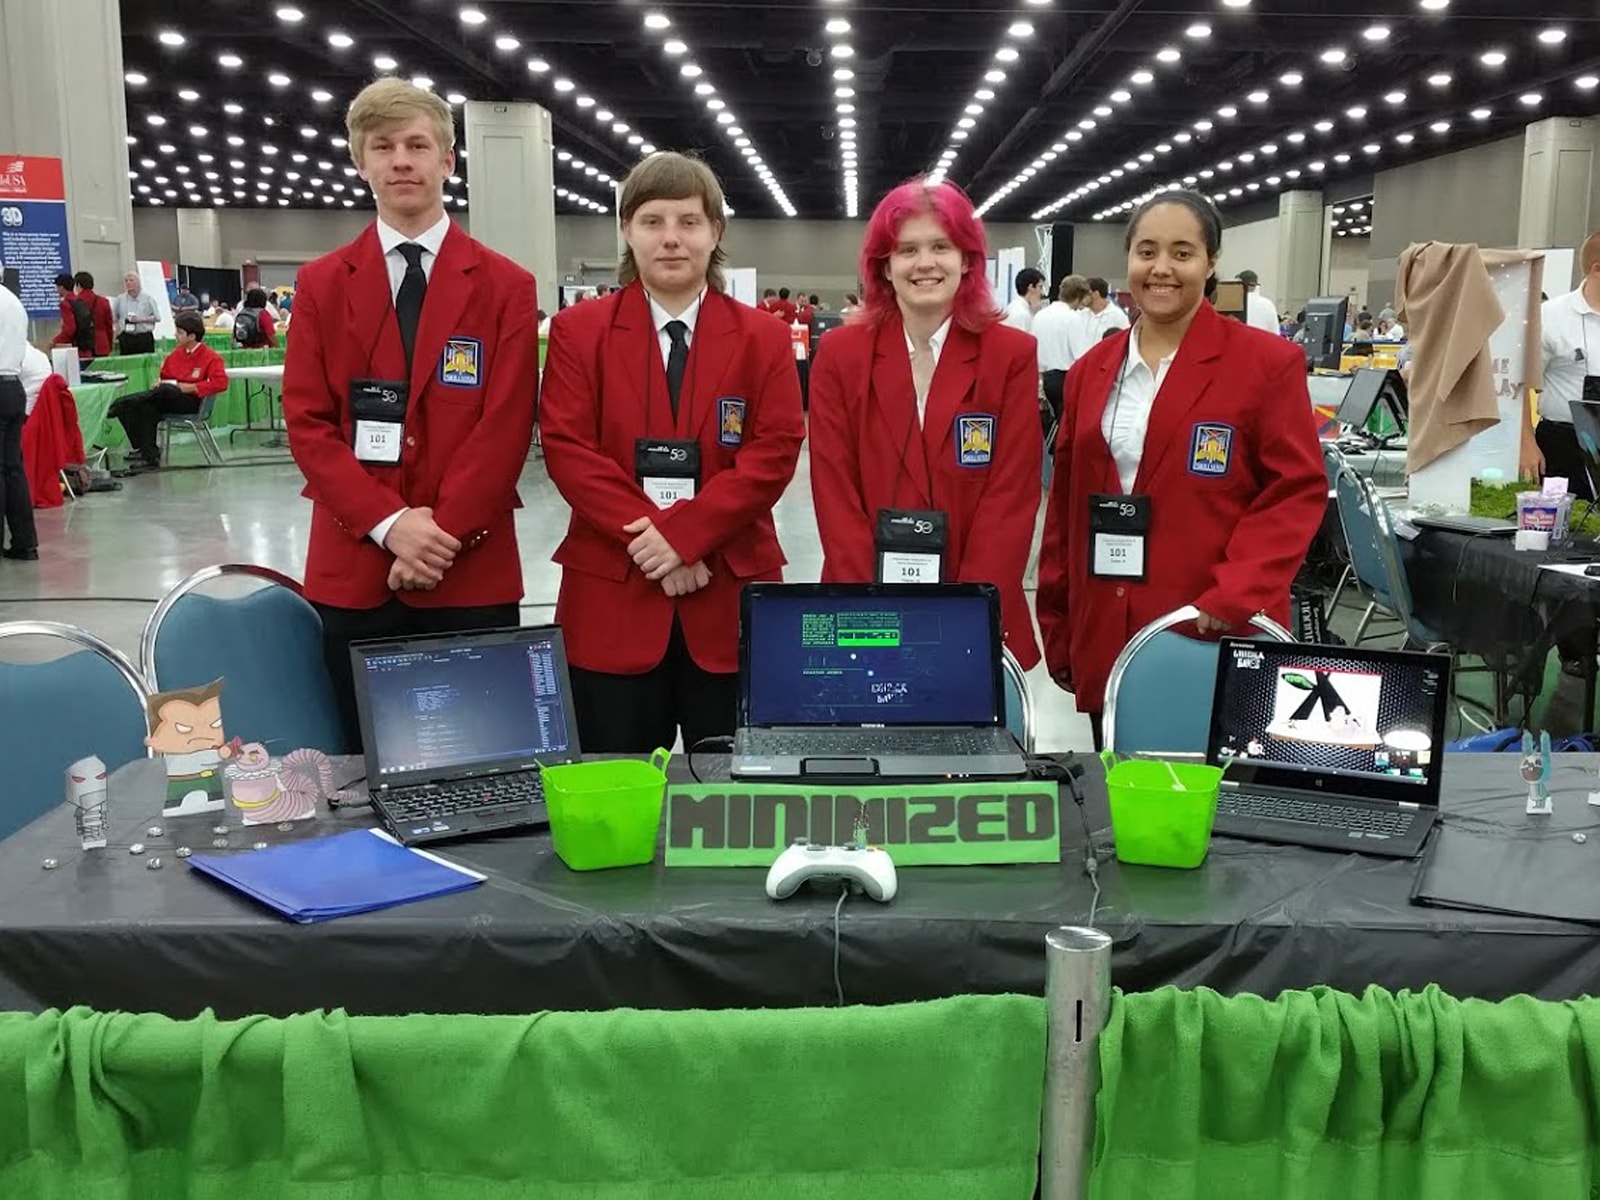 DigiPen WANIC Academy students posing in matching red jackets at their booth at the SkillsUSA competition